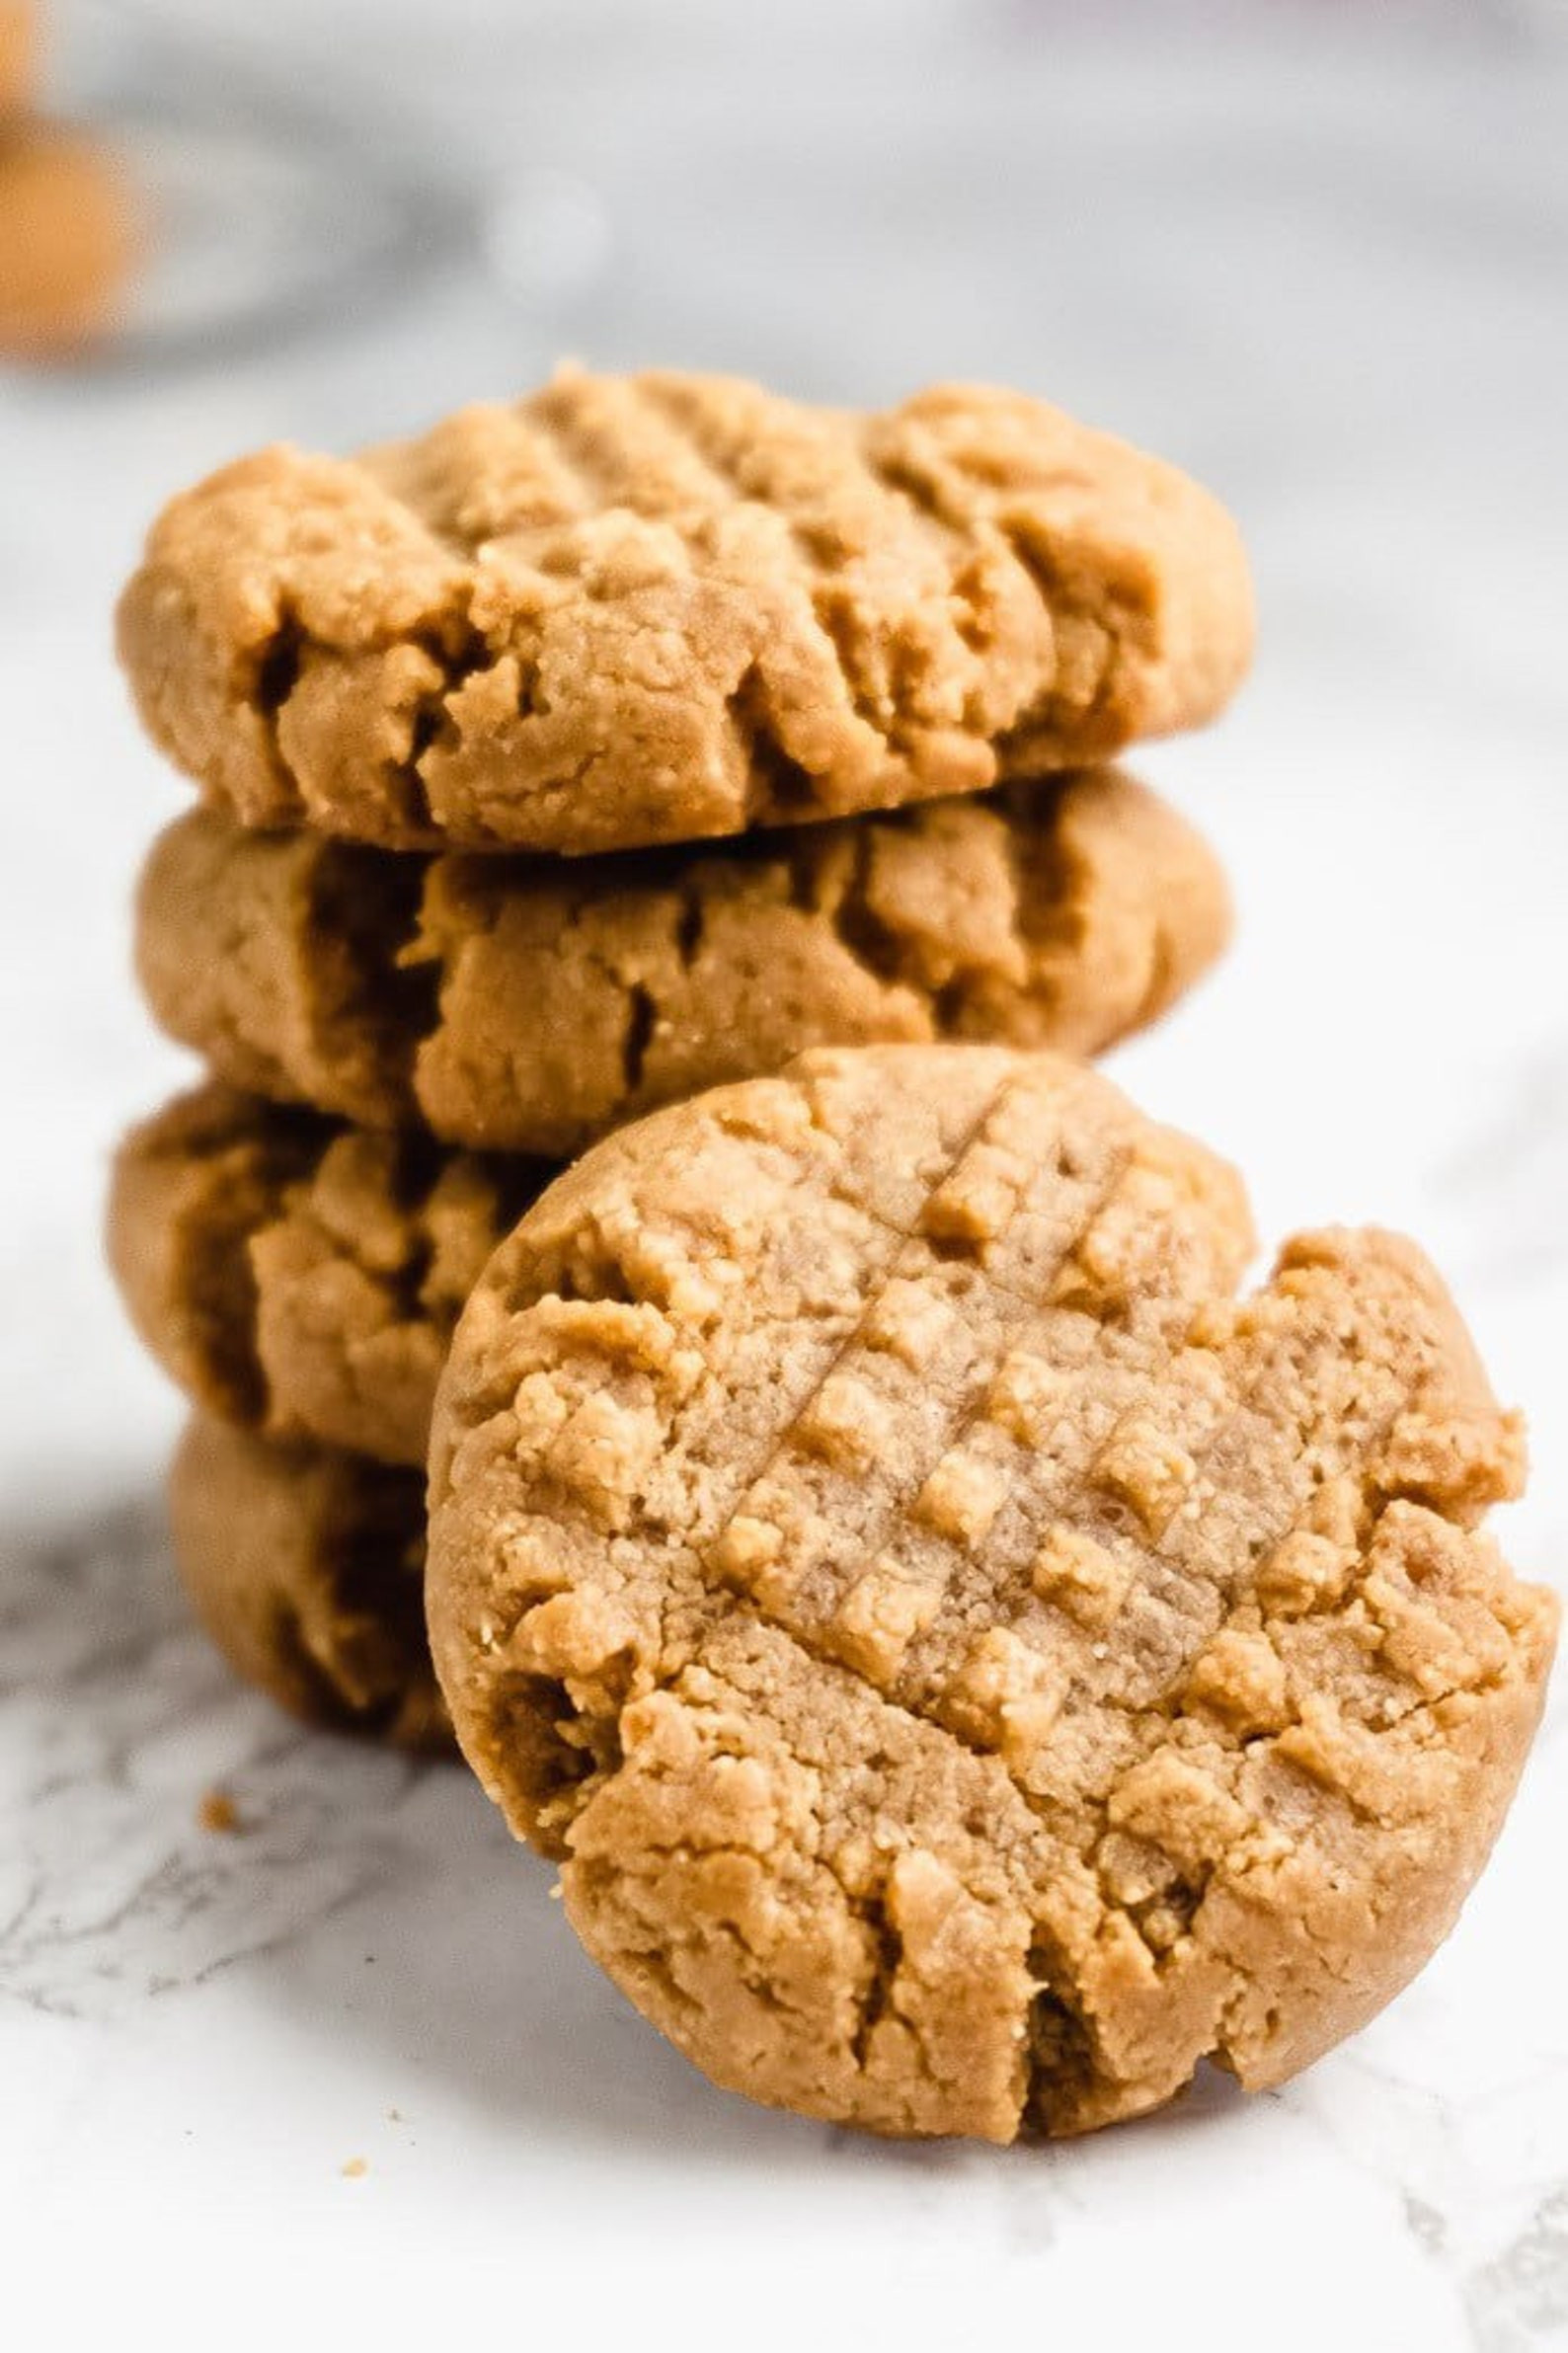 Peanut butter Keto Cookies Awesome Homemade Keto Sugar Free Peanut butter Cookies Made In